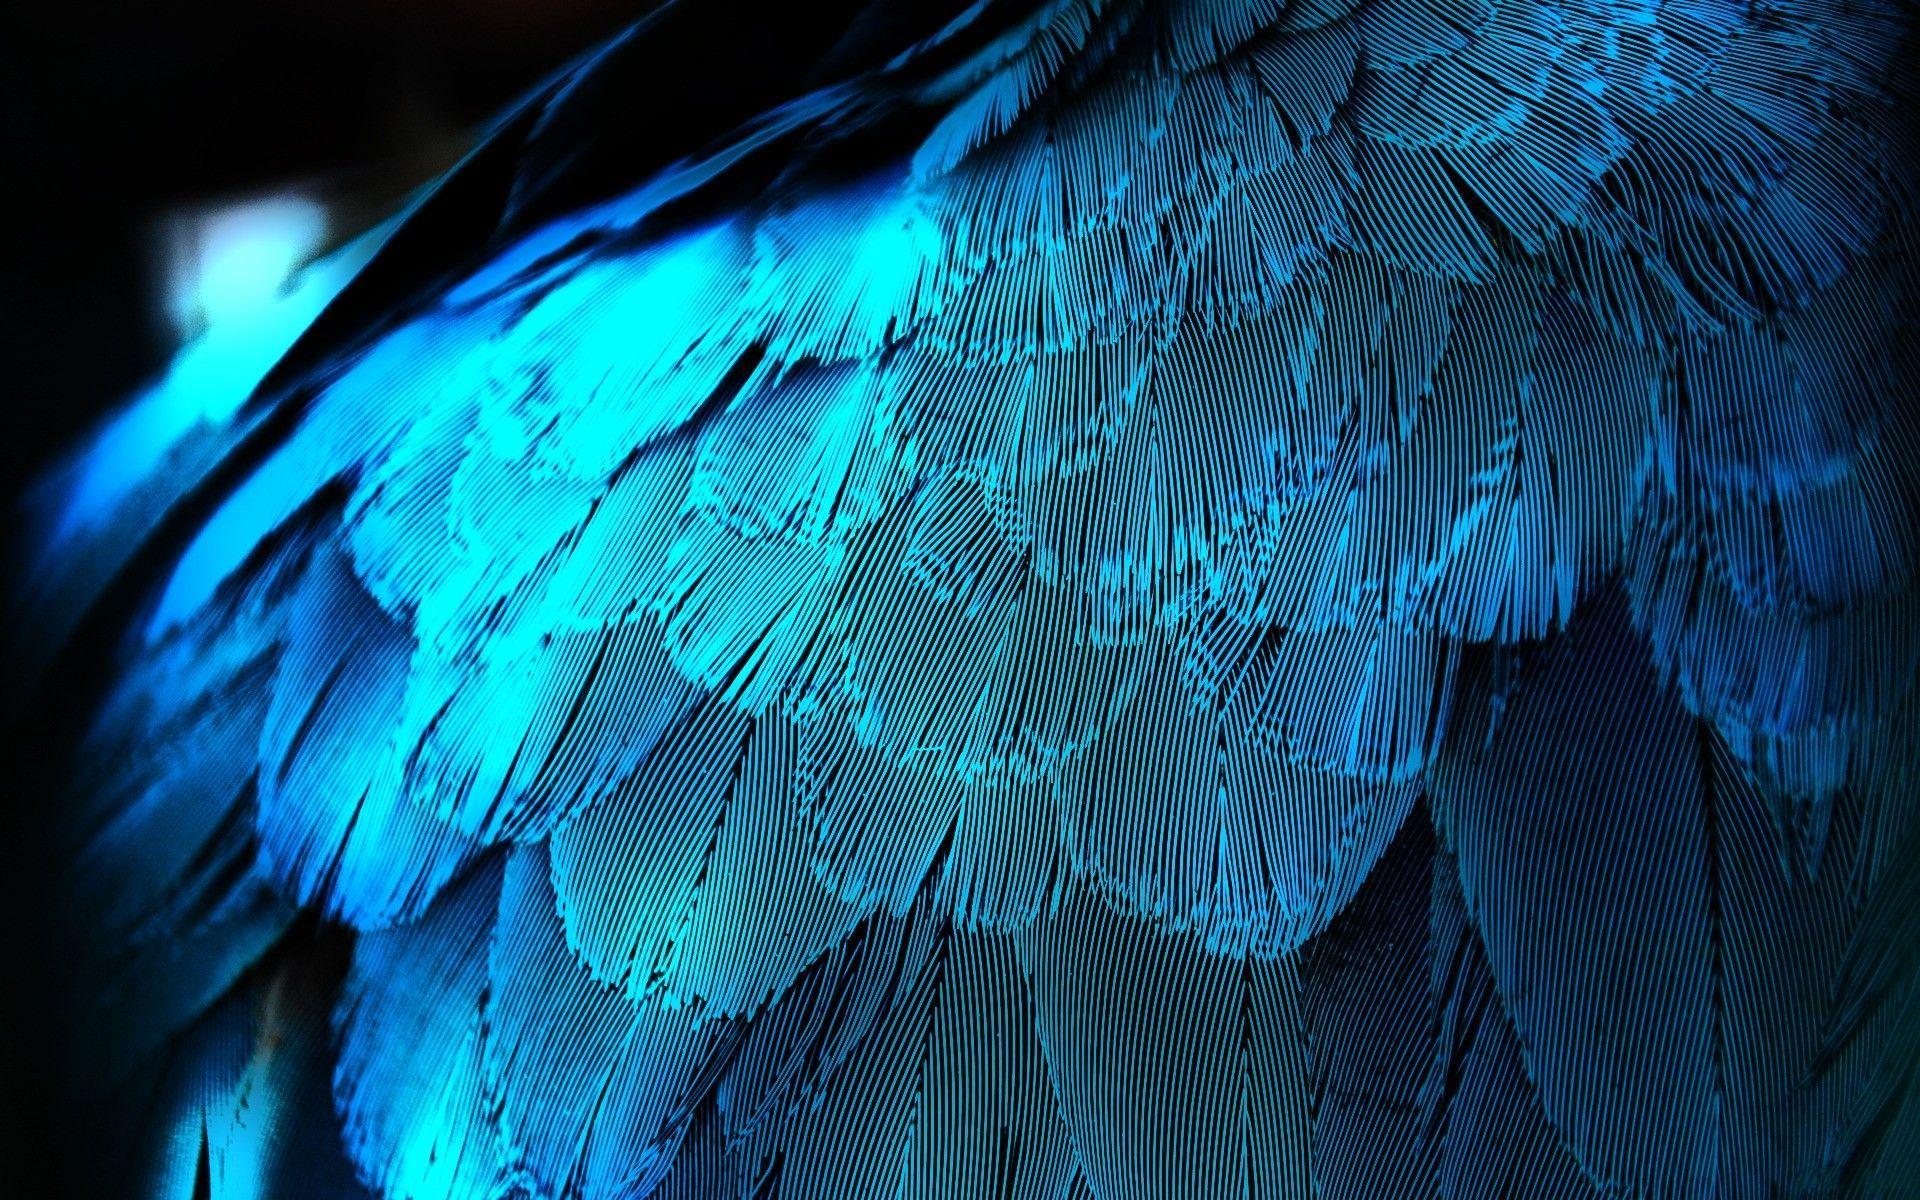 A rectangular image of blue feathers that resemble the dragon's own.